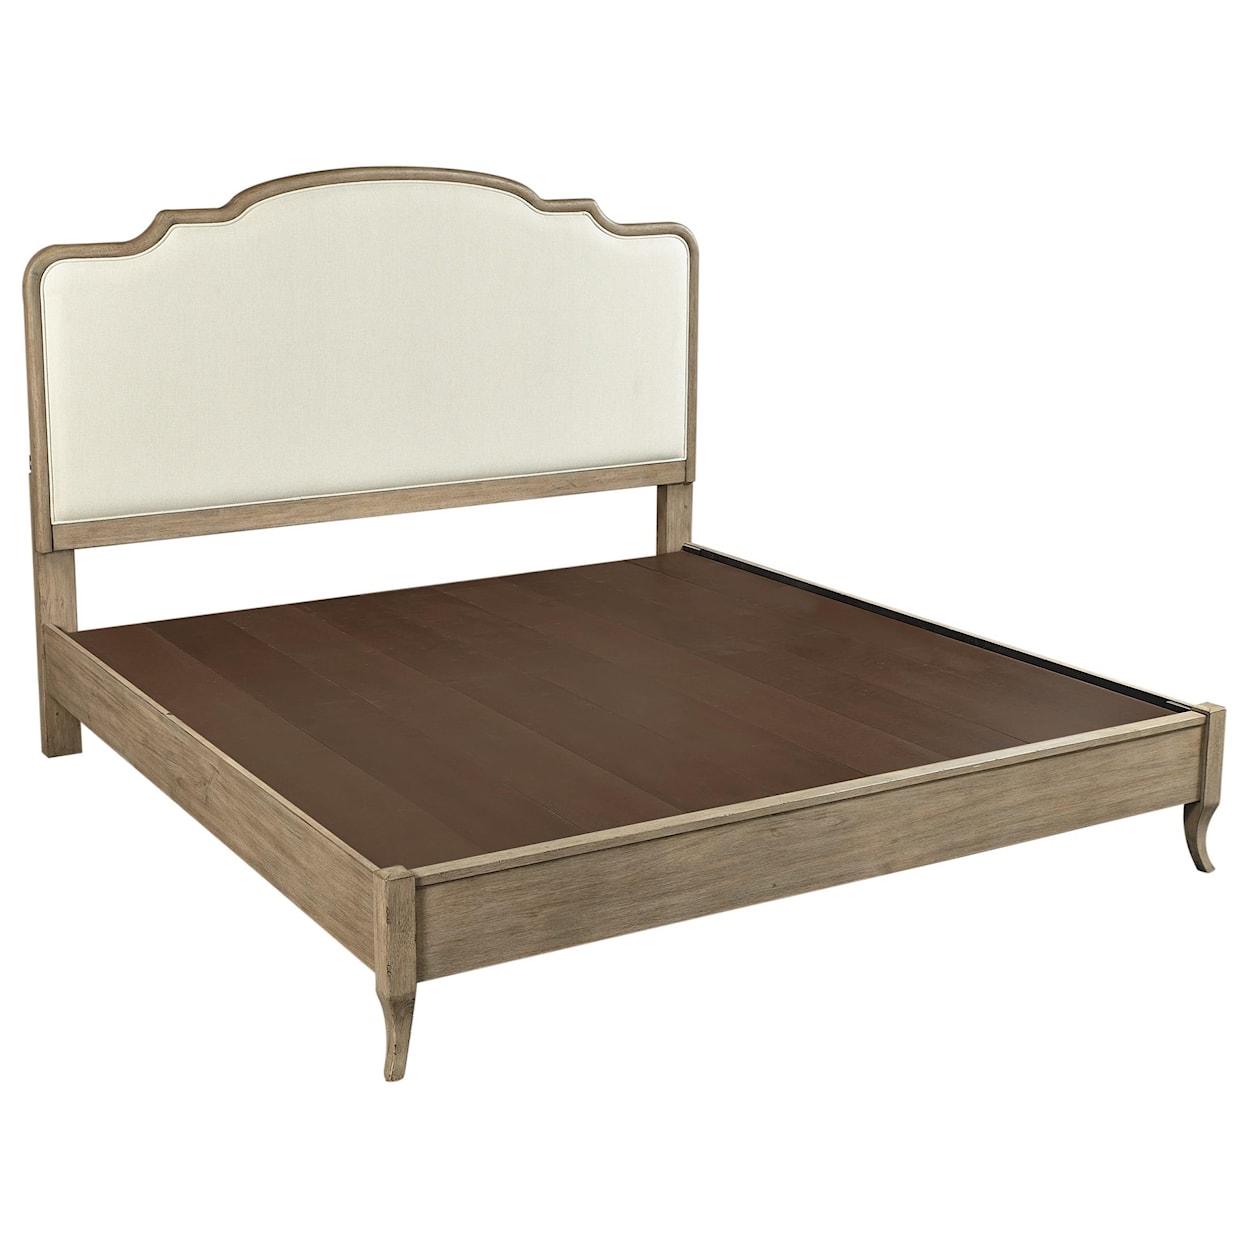 Aspenhome Provence Cal King Upholstered Panel Bed